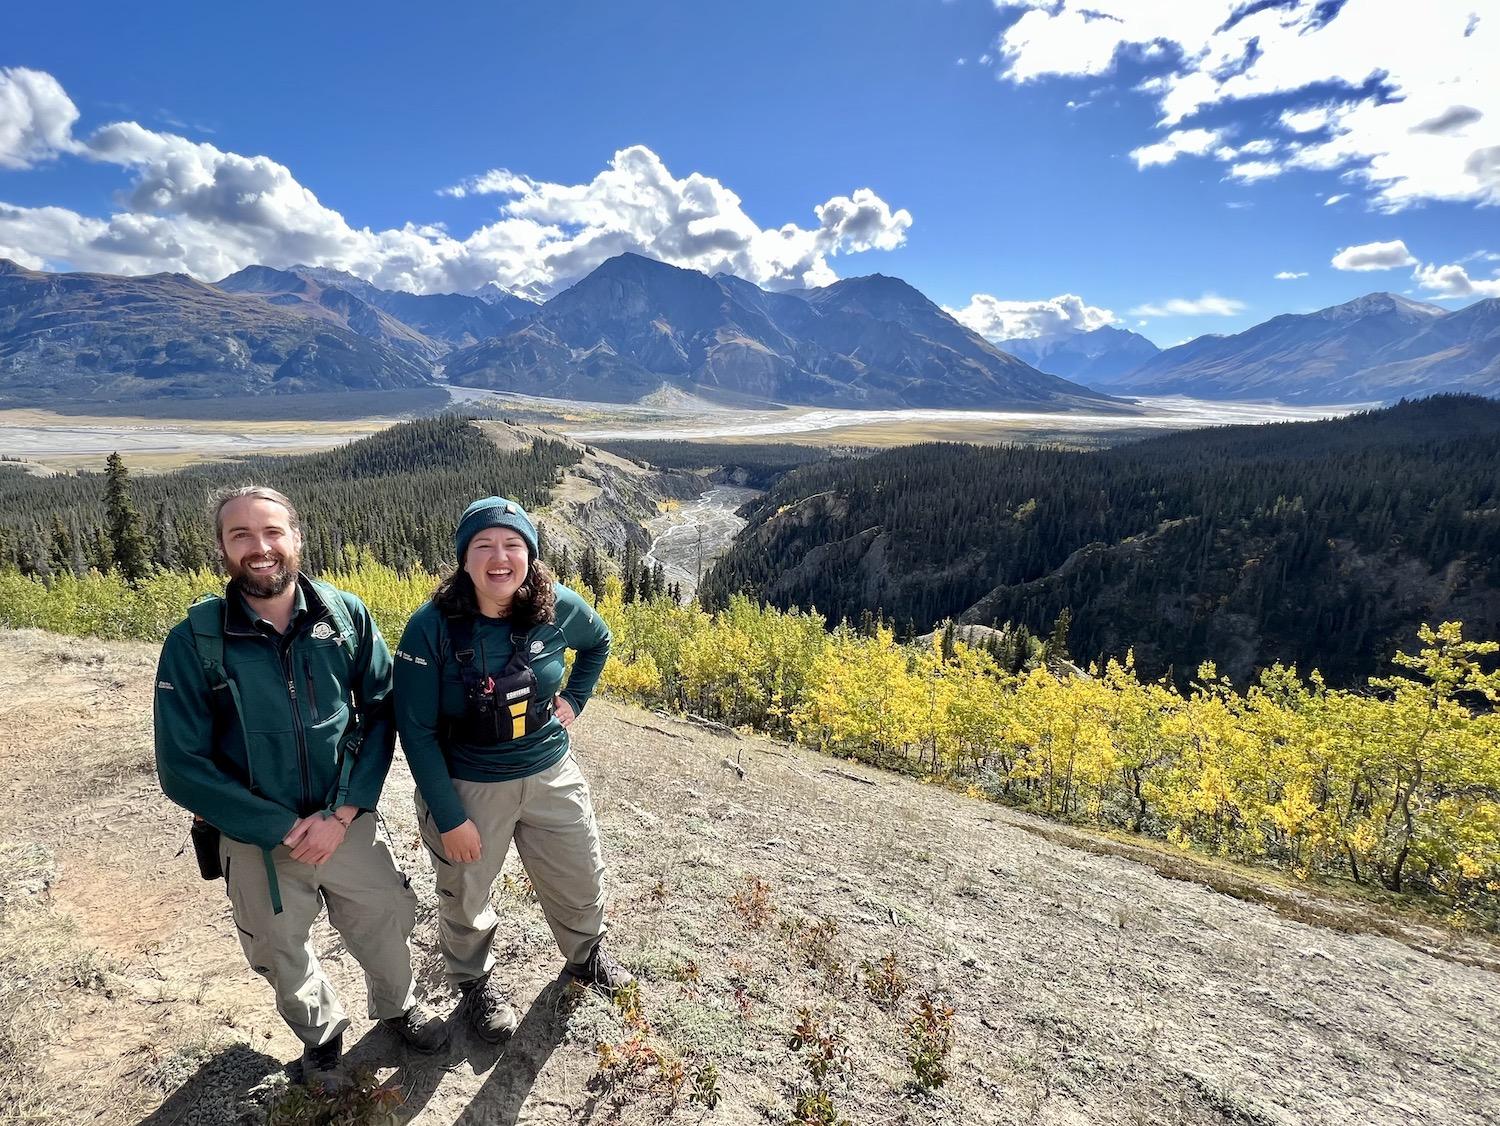 Parks Canada's Logan McKillop and Rachelle Linde stand at the first viewpoint on Kluane's Sheep Creek Trail.